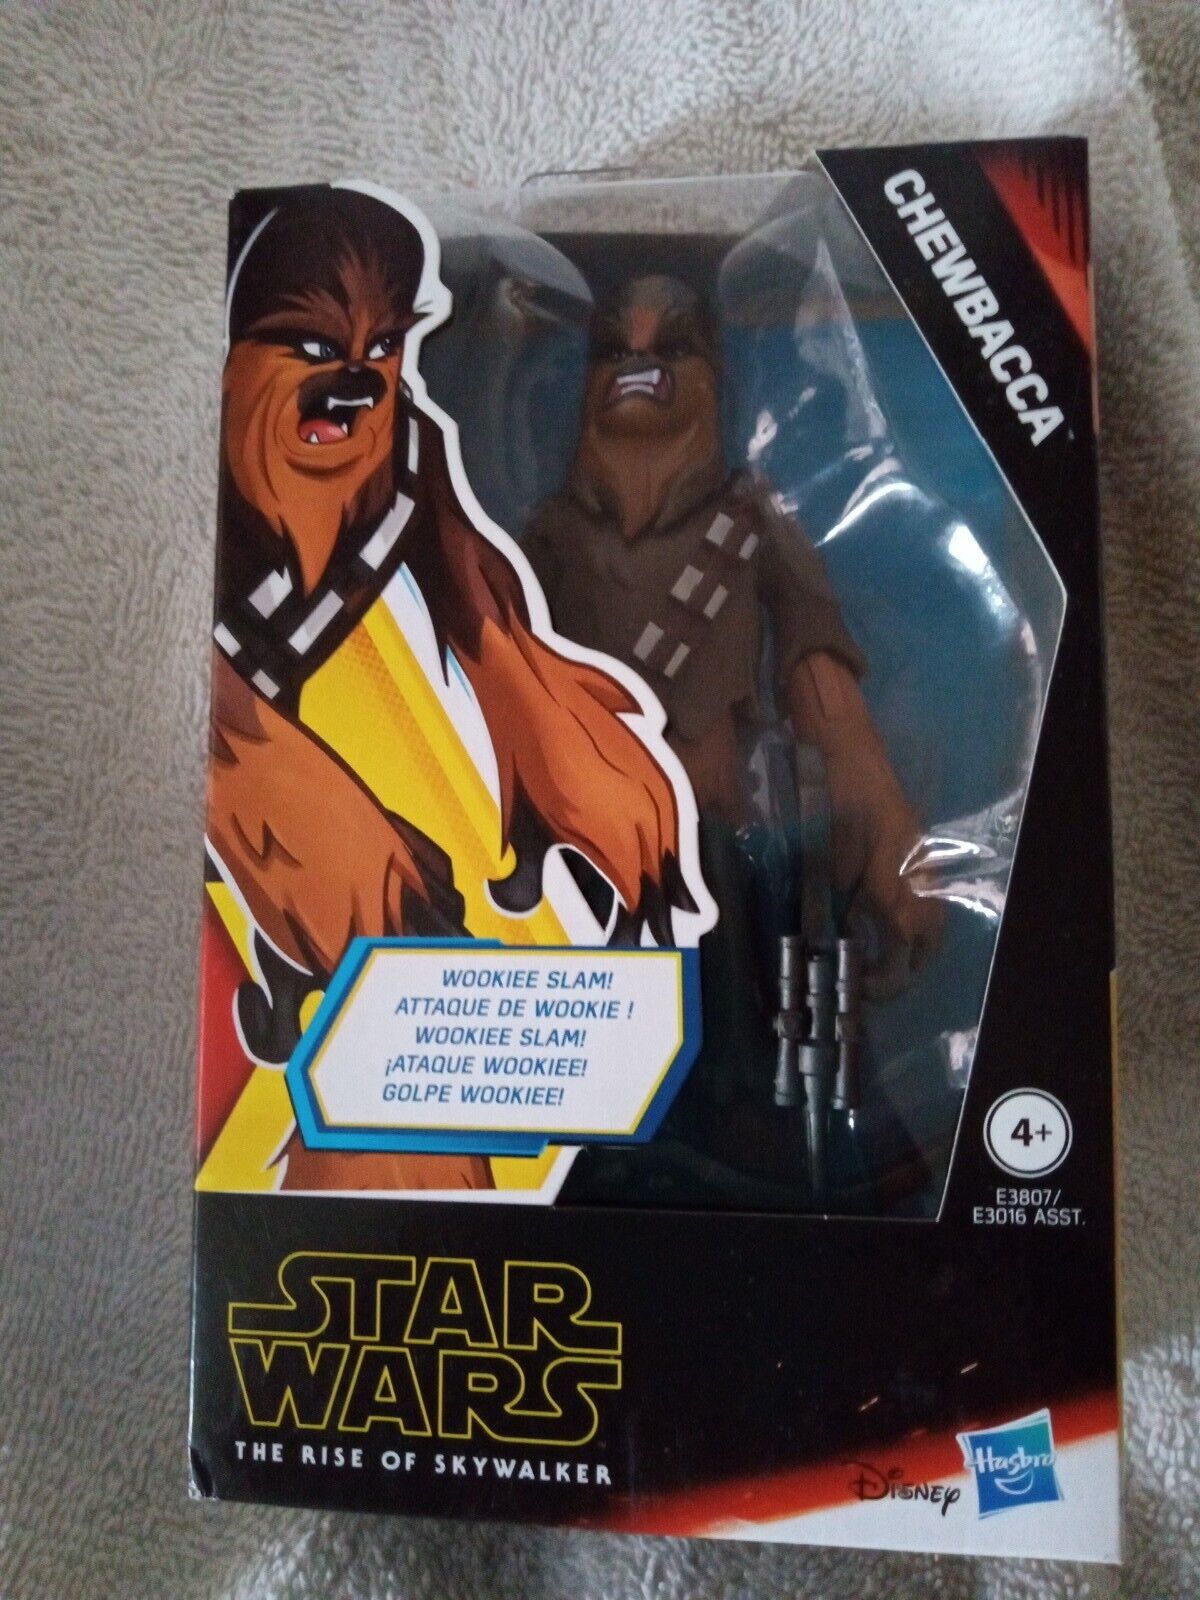 Hasbro Star Wars Galaxy of Adventures CHEWBACCA Toy Action Figure About 6"